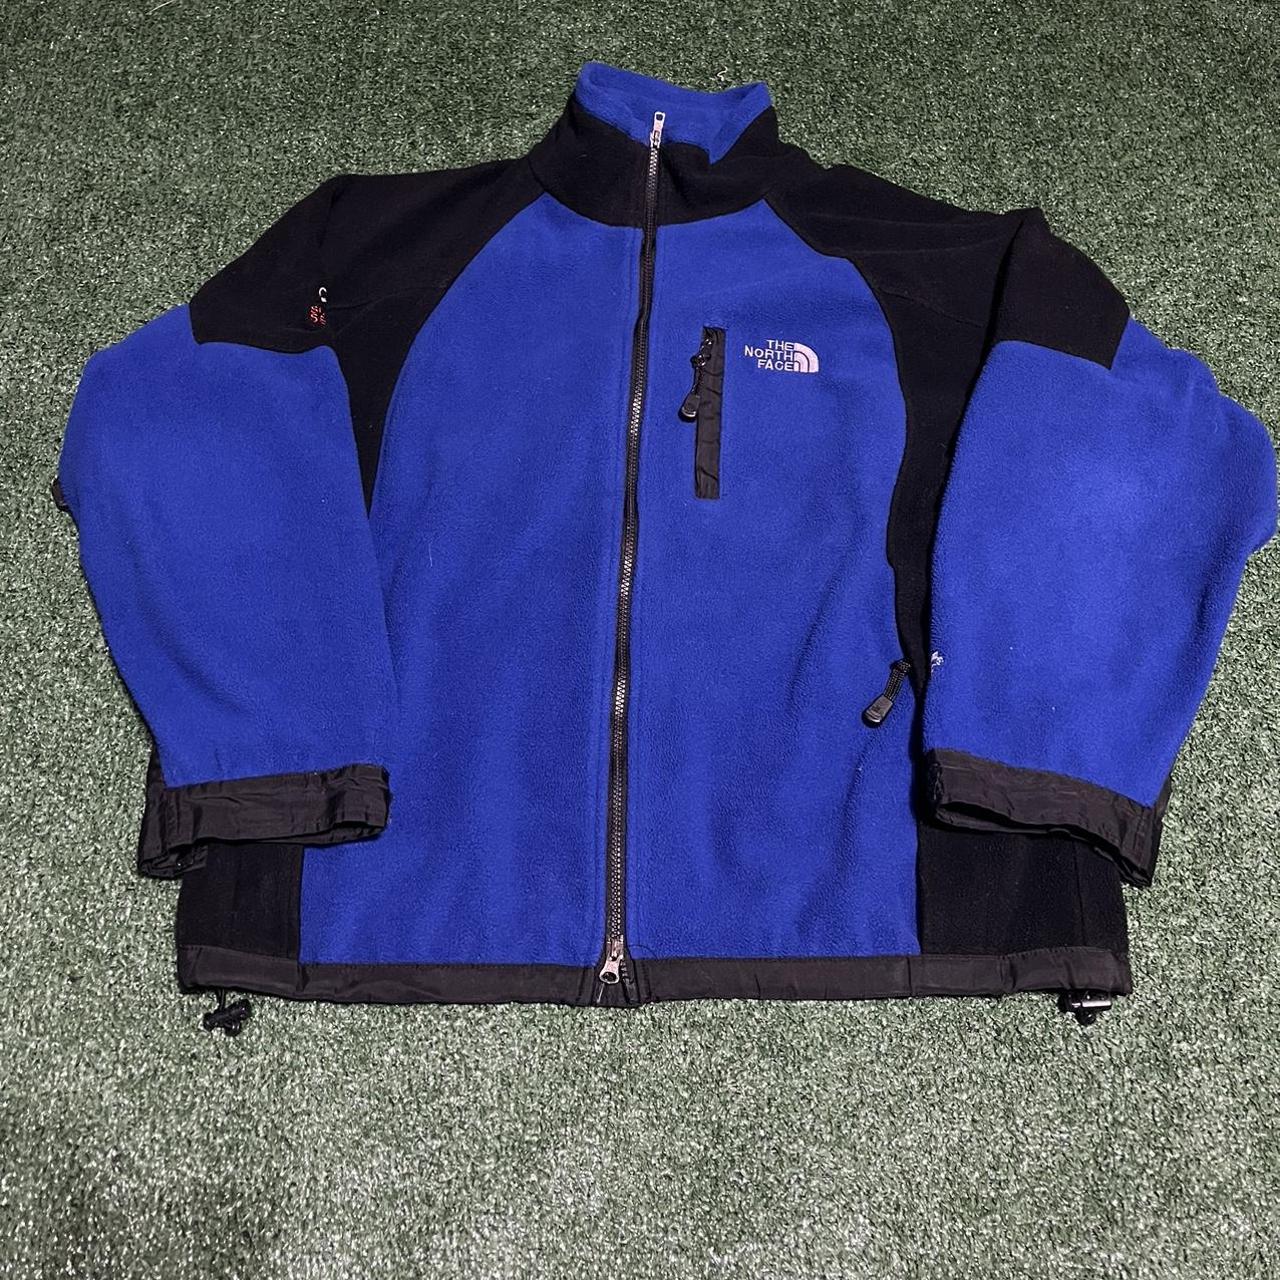 The North Face Men's Blue and Black Jacket